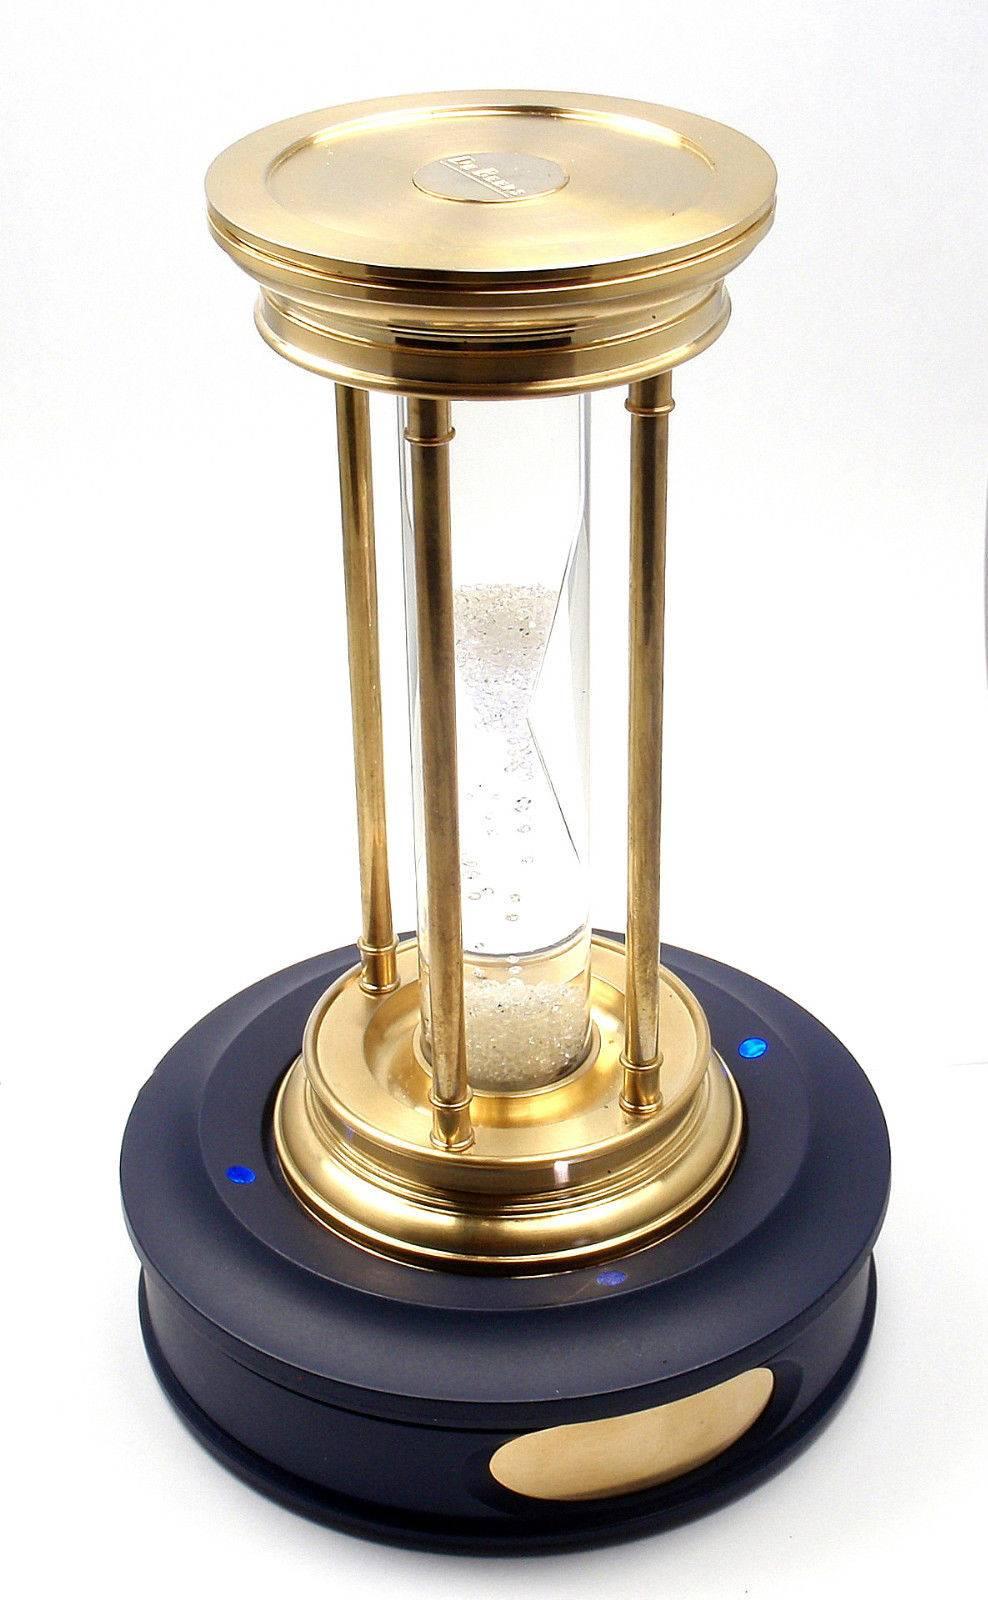 Very Rare! Limited Edition Millennium 2000 Diamond Brass Hourglass Timer by De Beers.
This item comes with lighted pedestal, box and certificate.

This hourglass was just sold on June 3, 2015 at Christies for $41,285.

Containing a cascade of